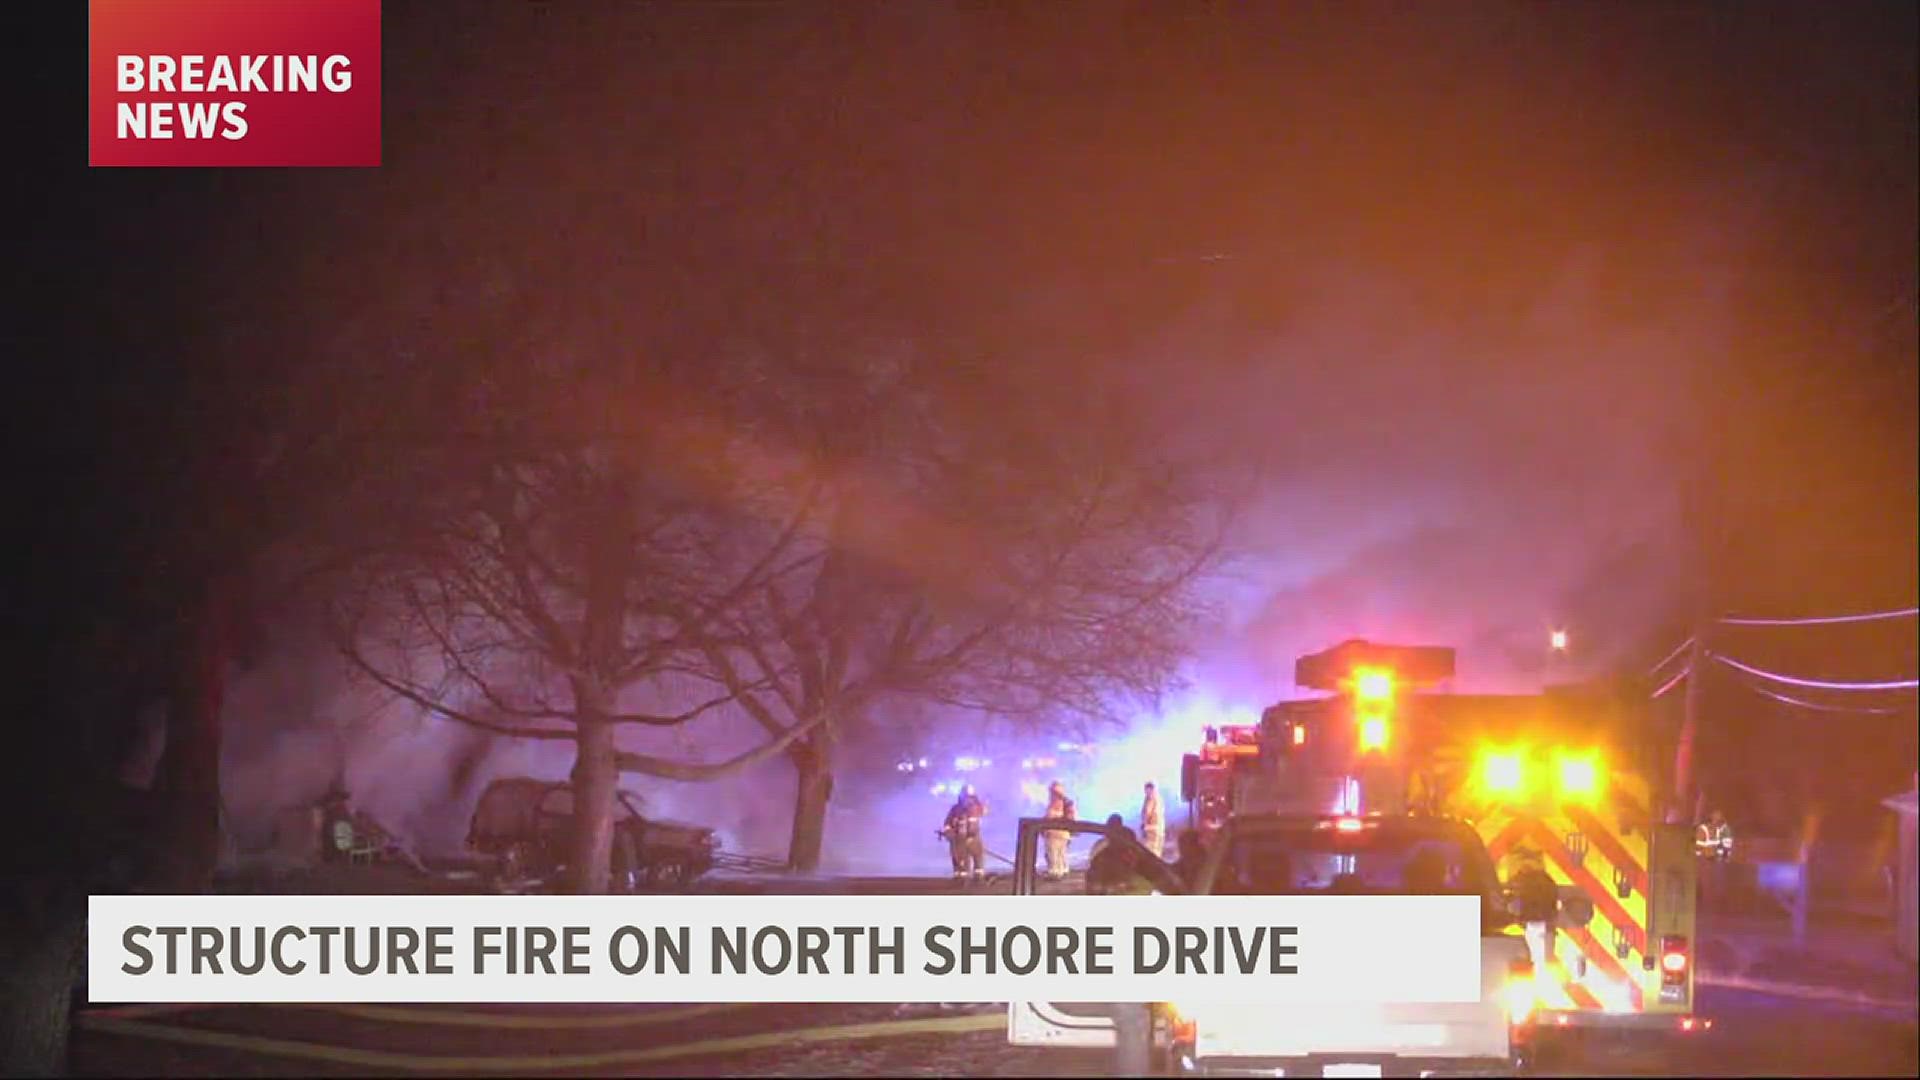 Moline Fire Department was called to North Shore Drive early Friday morning for a fire.